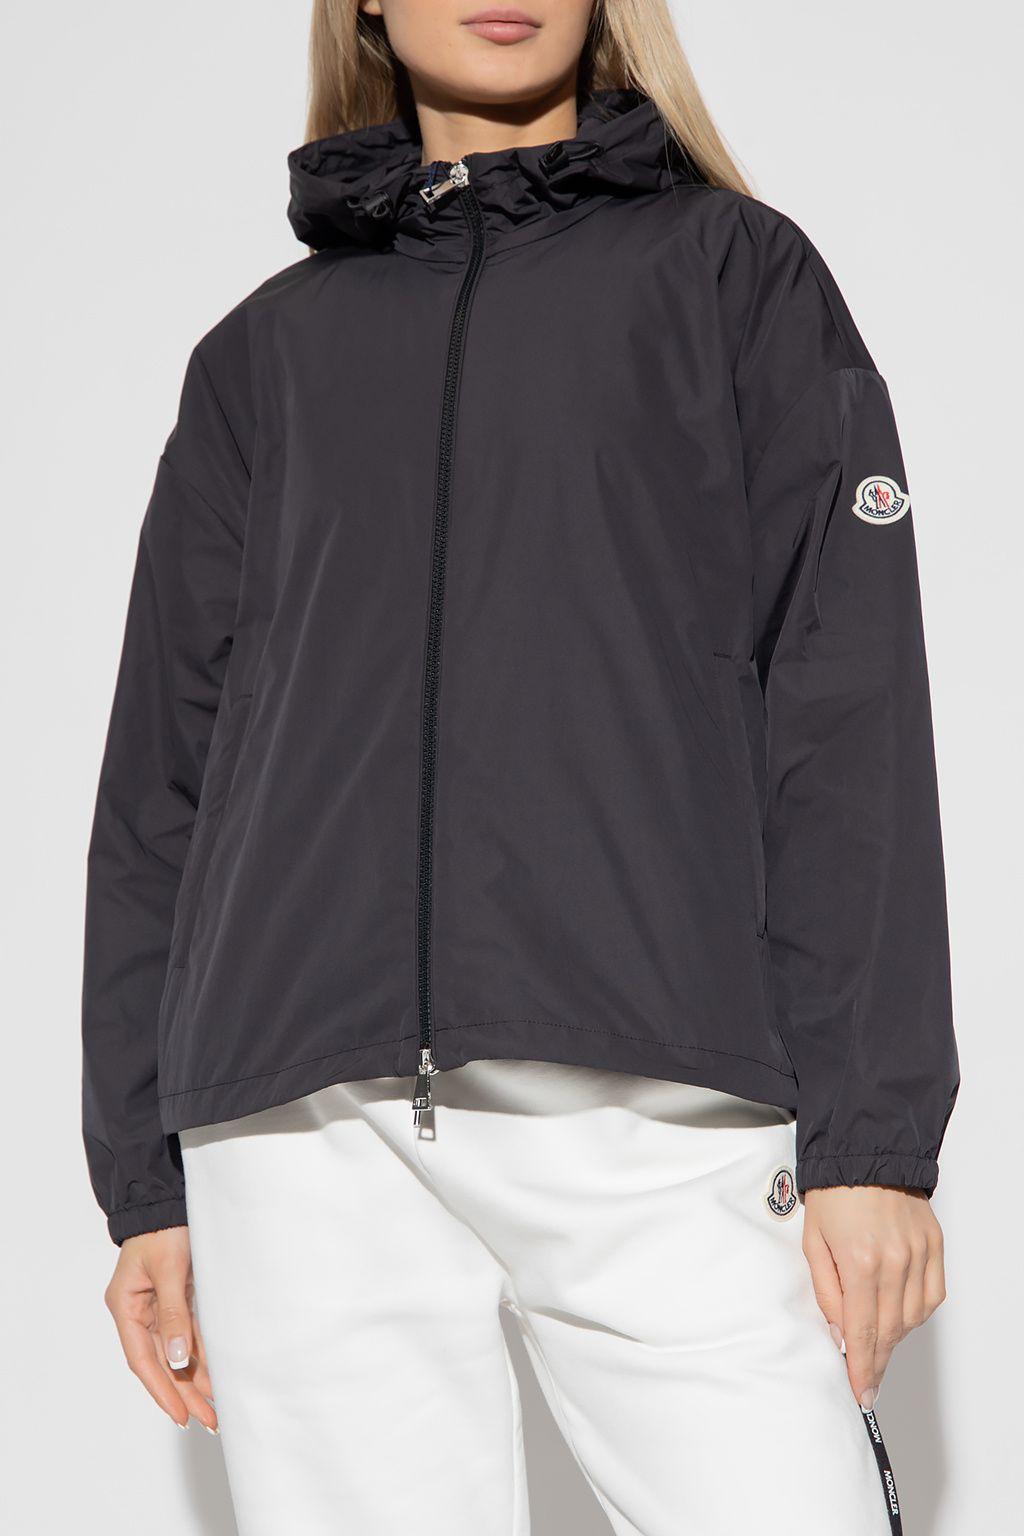 Moncler 'tyx' Jacket in Black | Lyst